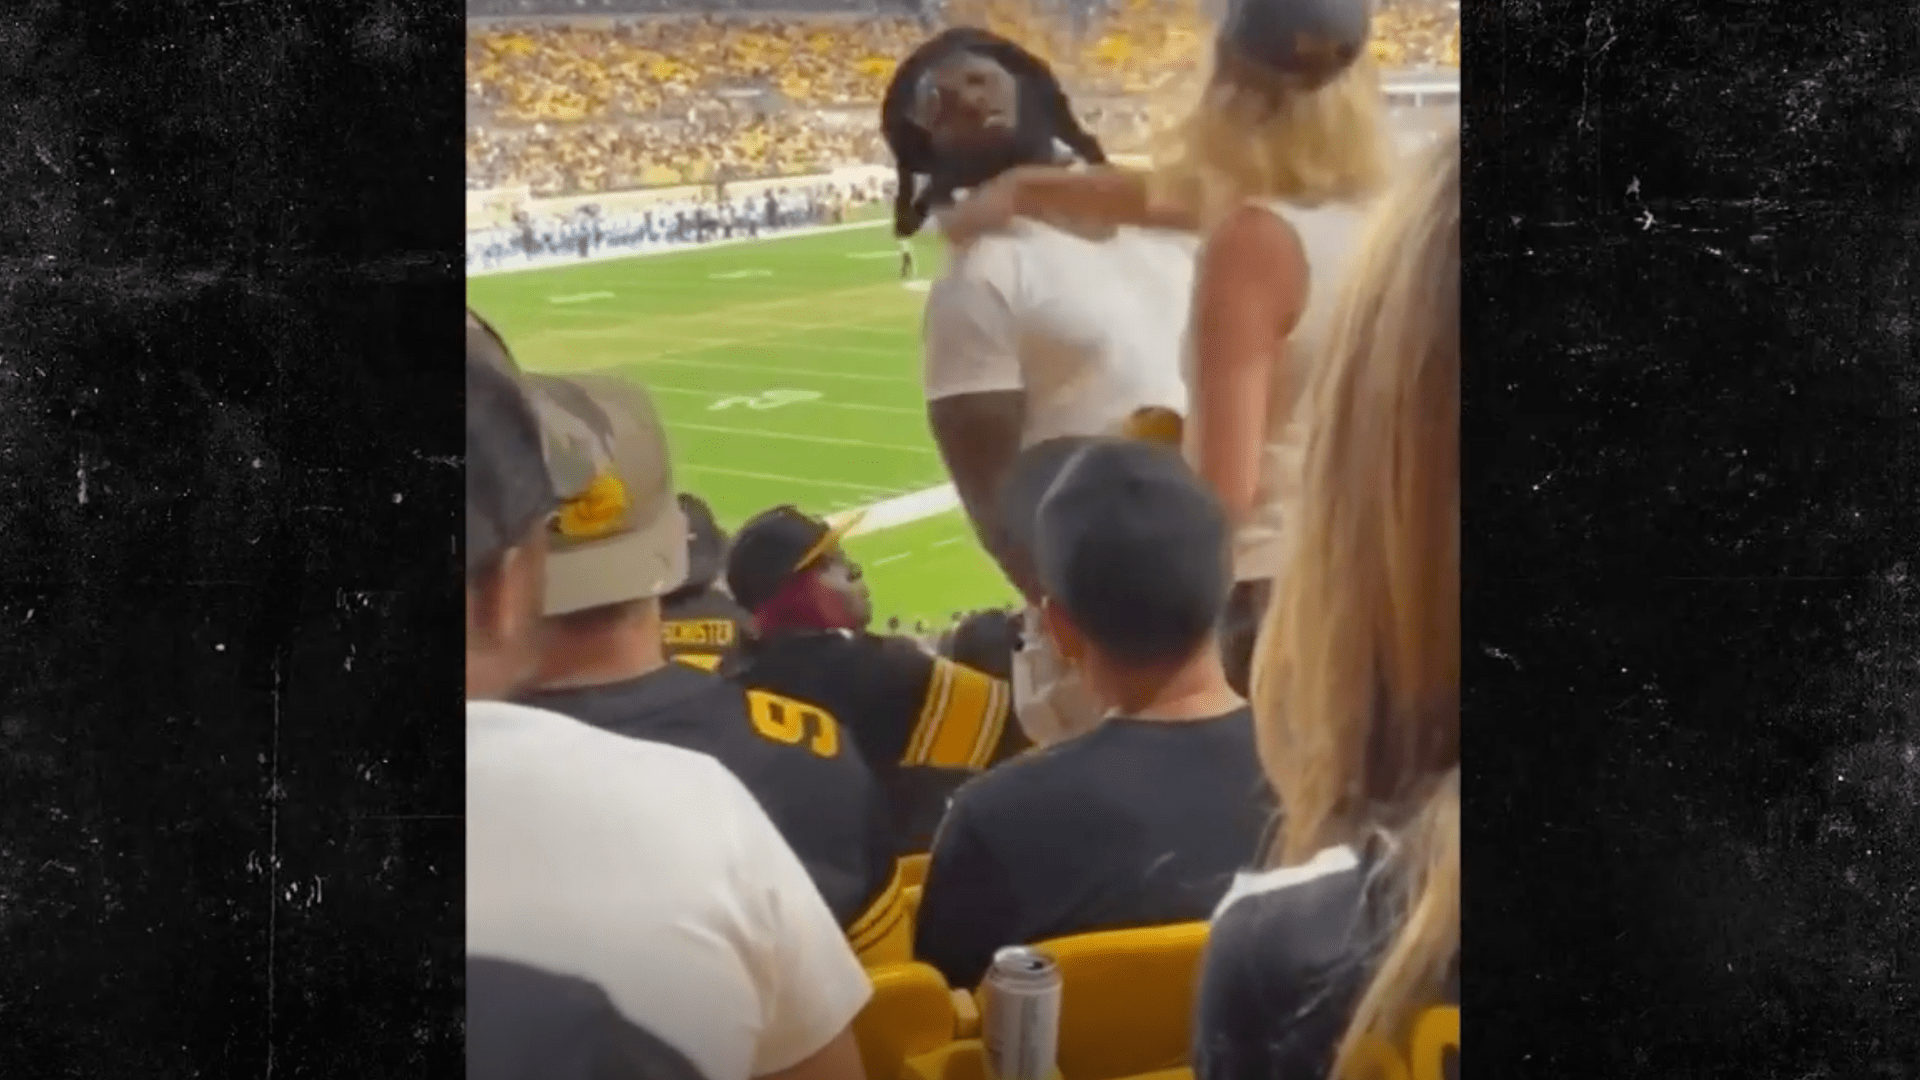 Fight Breaks Out at Steelers, Lions Game After Woman Slaps Man in Face